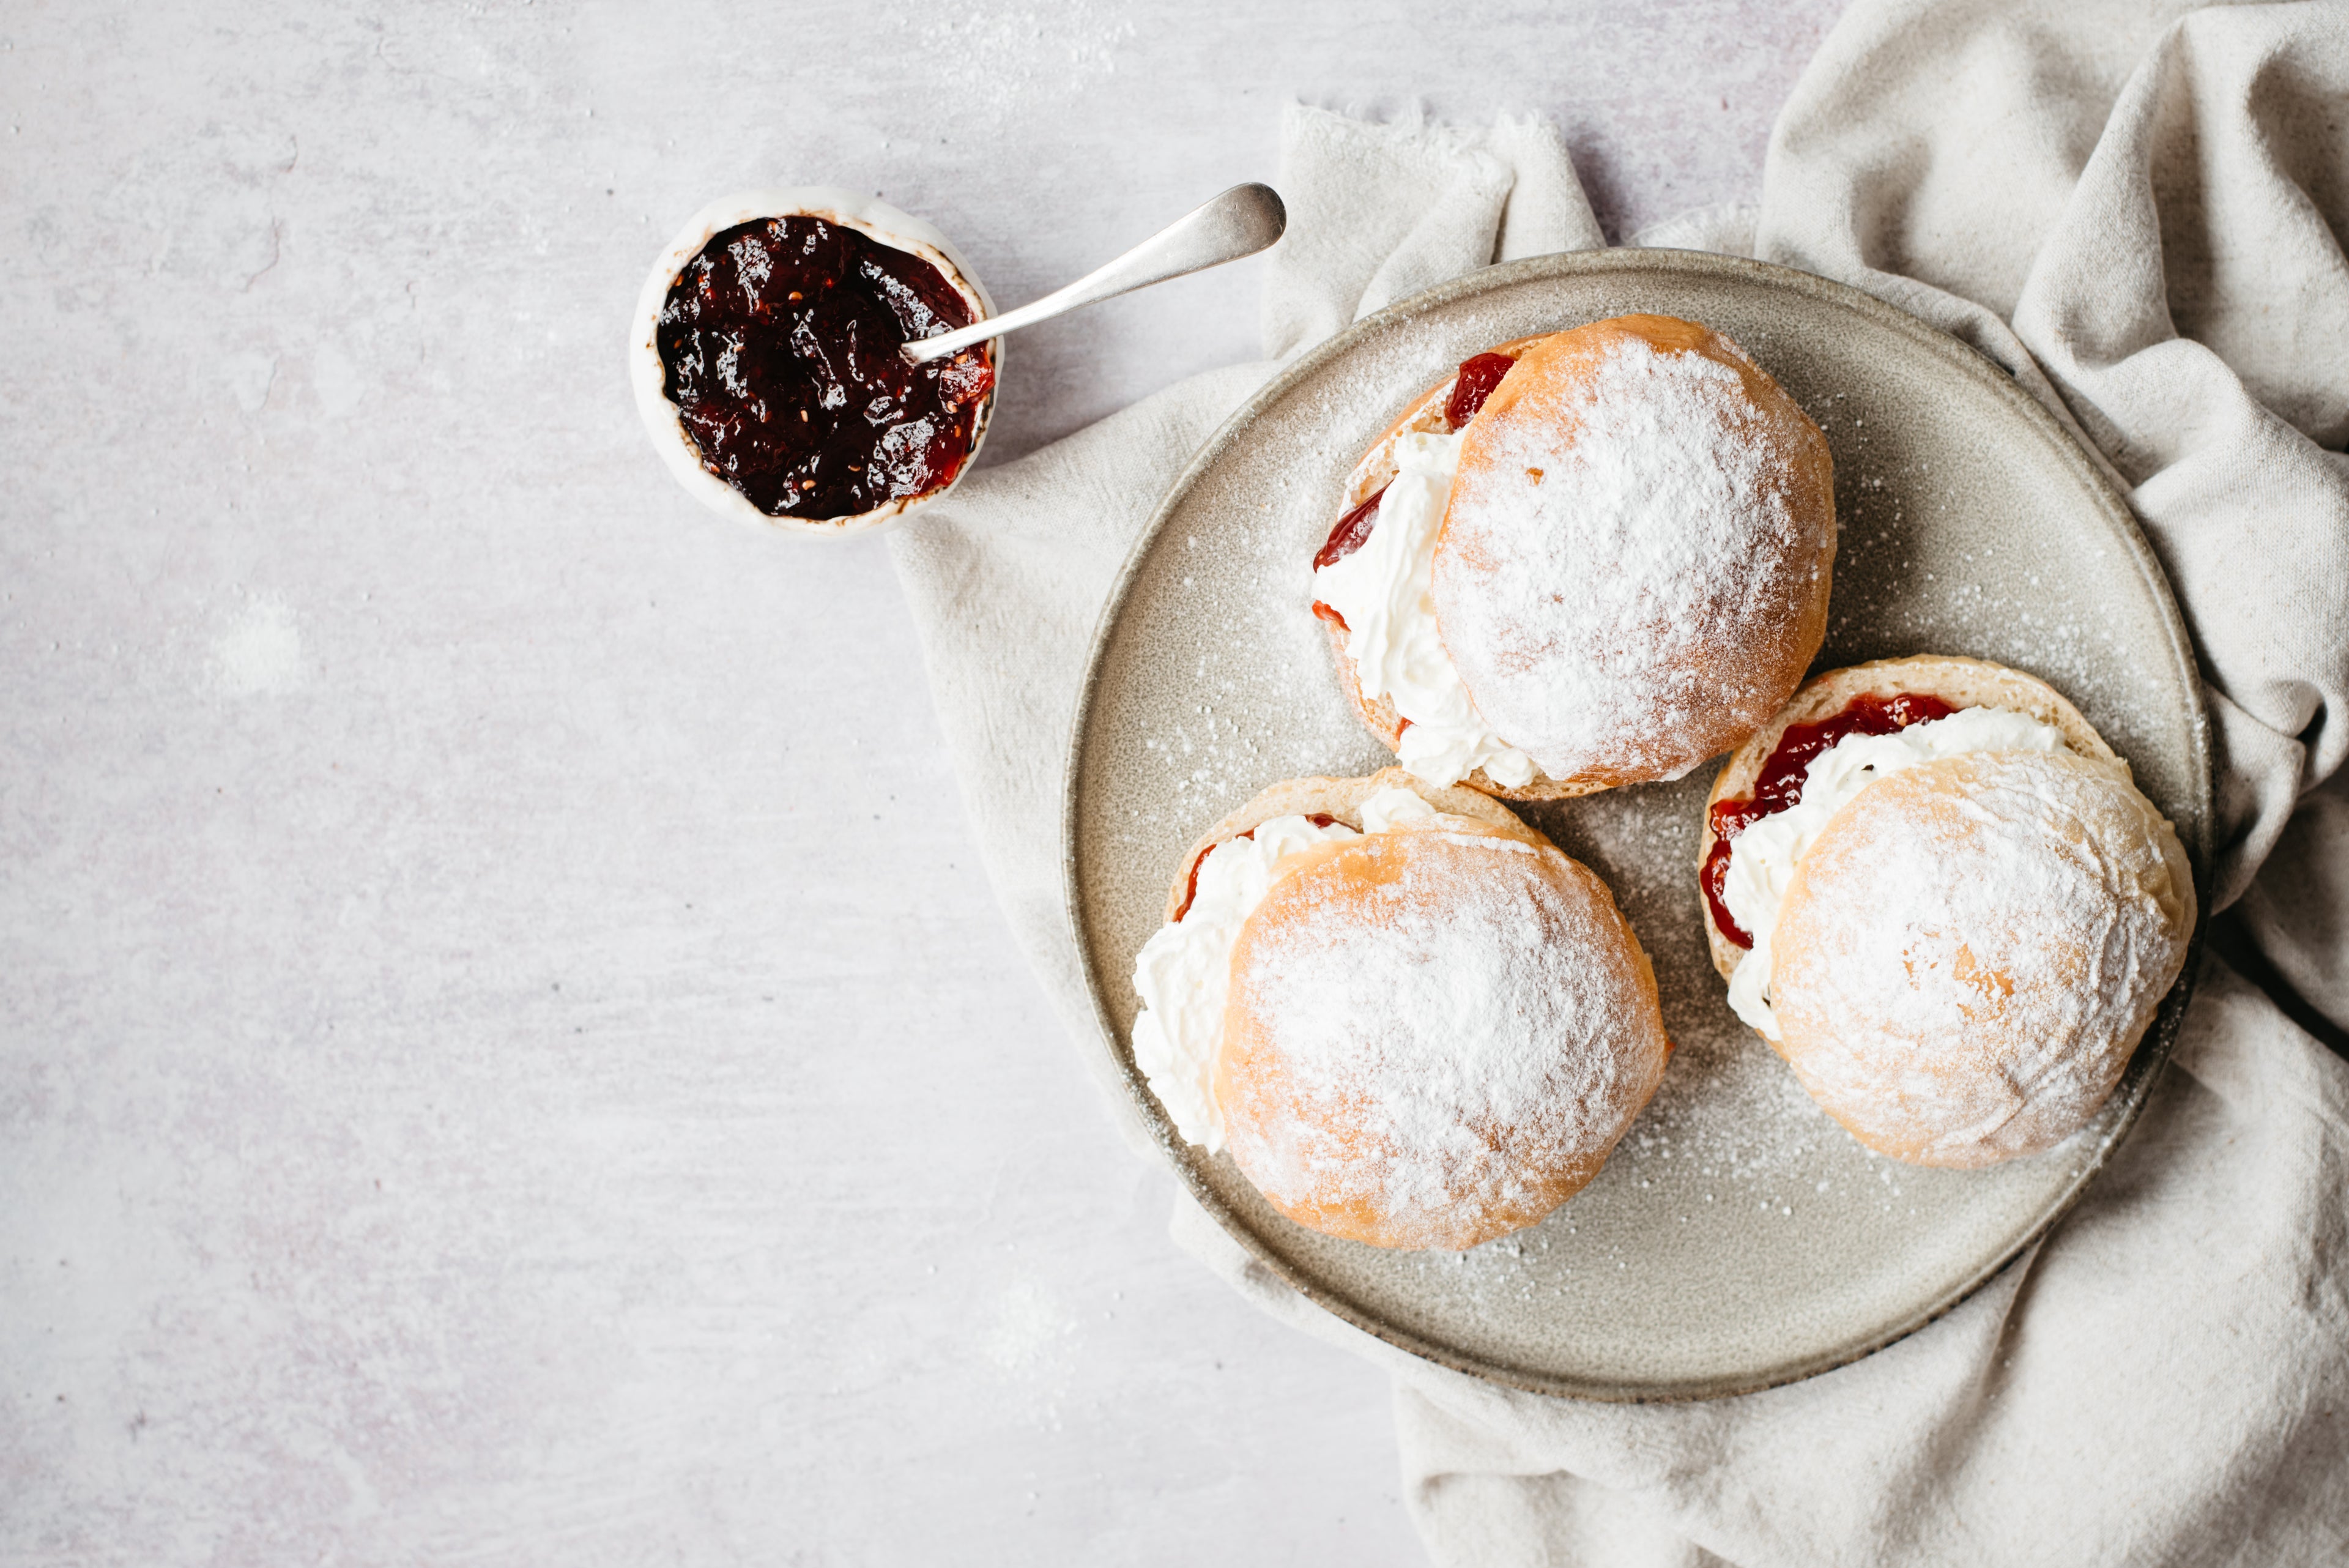 Top view of Devonshire Splits on a plate, dusted with icing sugar next to a bowl of jam with a spoon